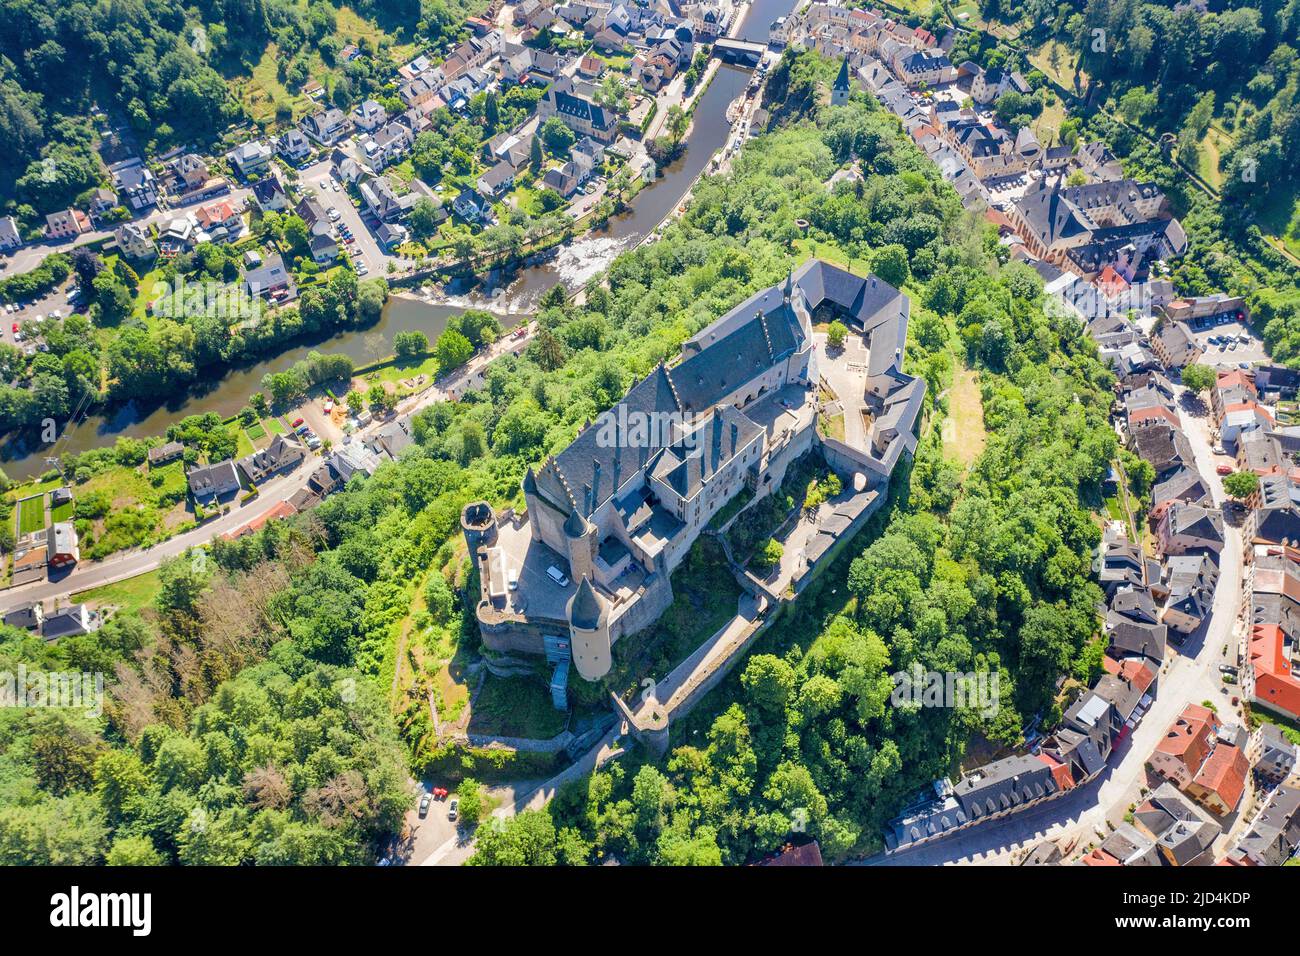 Aerial view of Vianden castle, canton of Vianden, Grand Duchy of Luxembourg, Europe Stock Photo